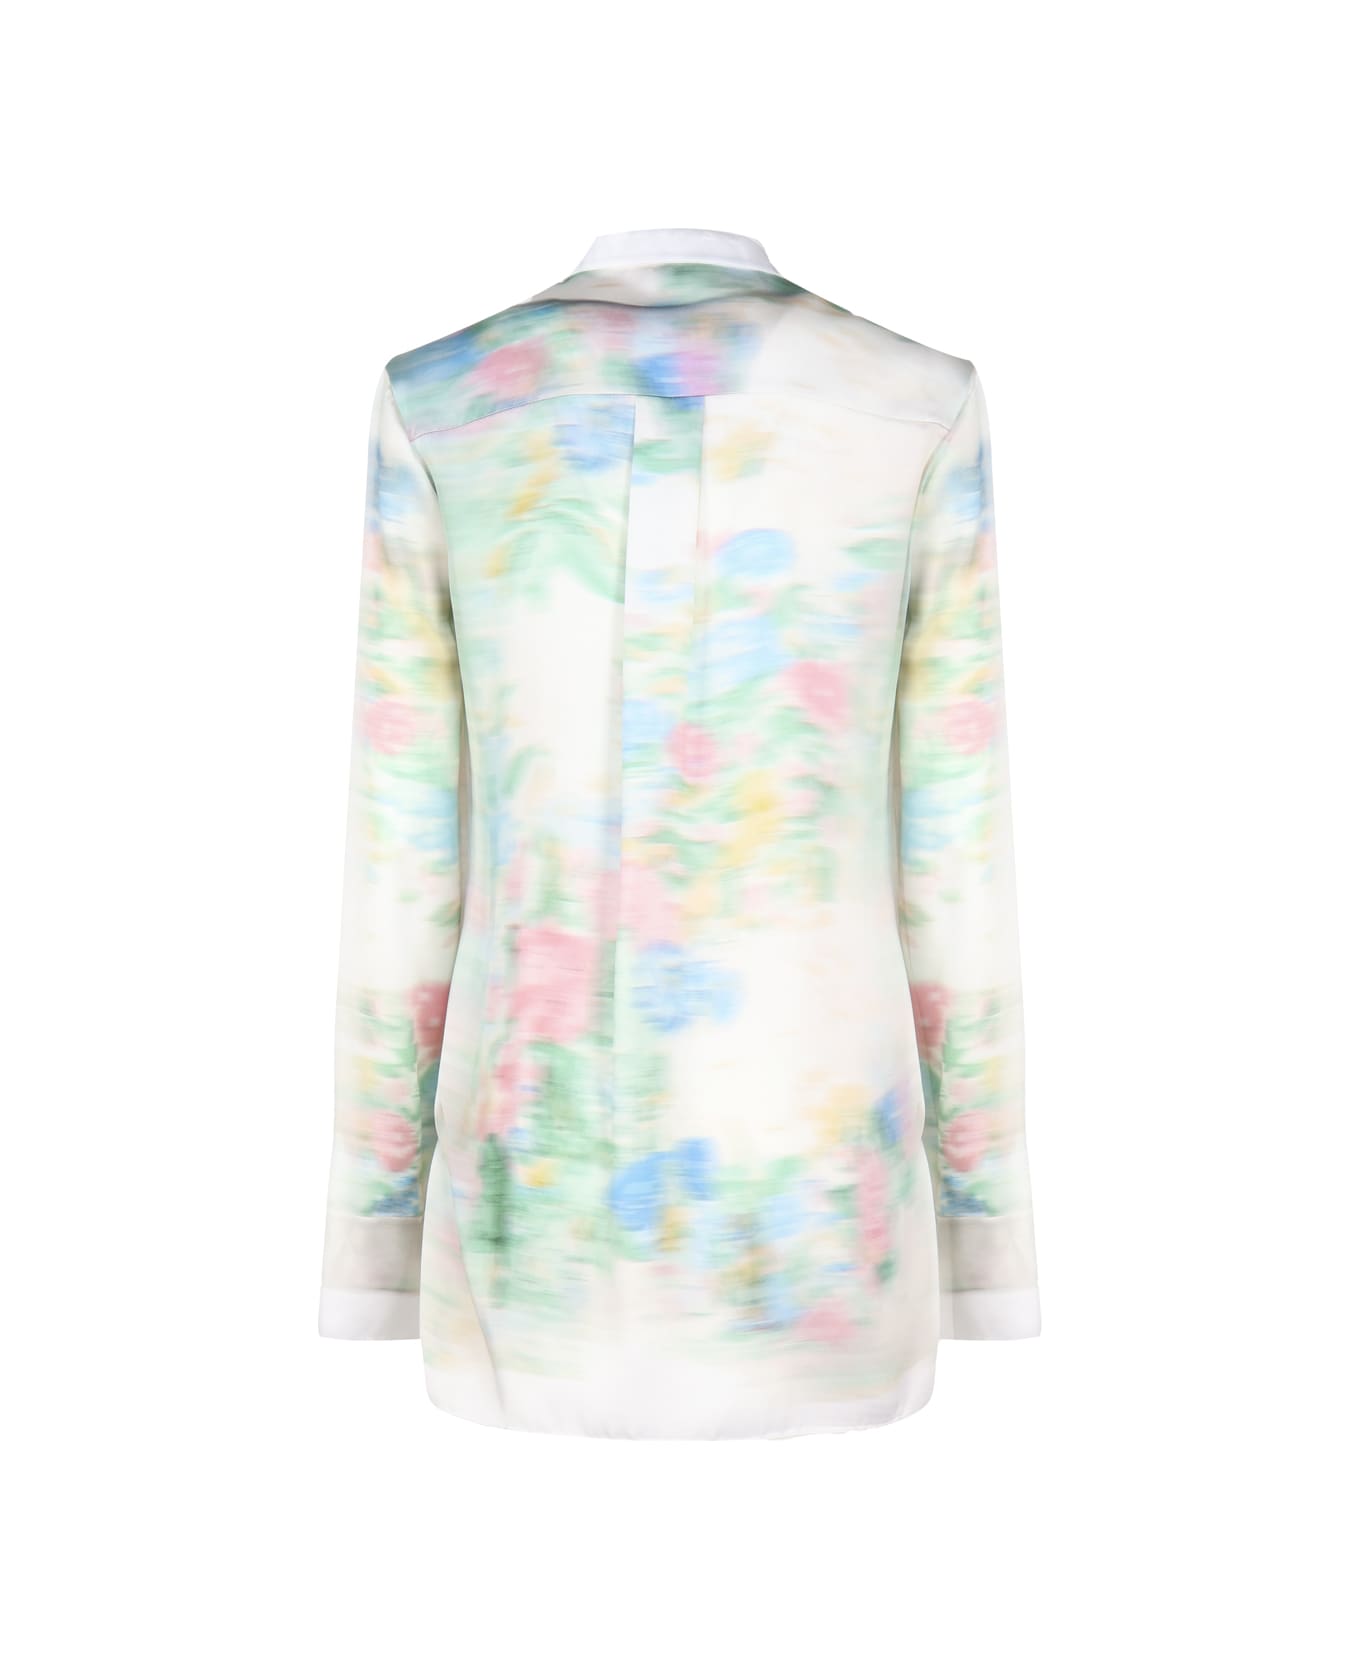 Loewe Shirt Crafted In Lightweight Viscose And Silk Satin - Multicolor シャツ